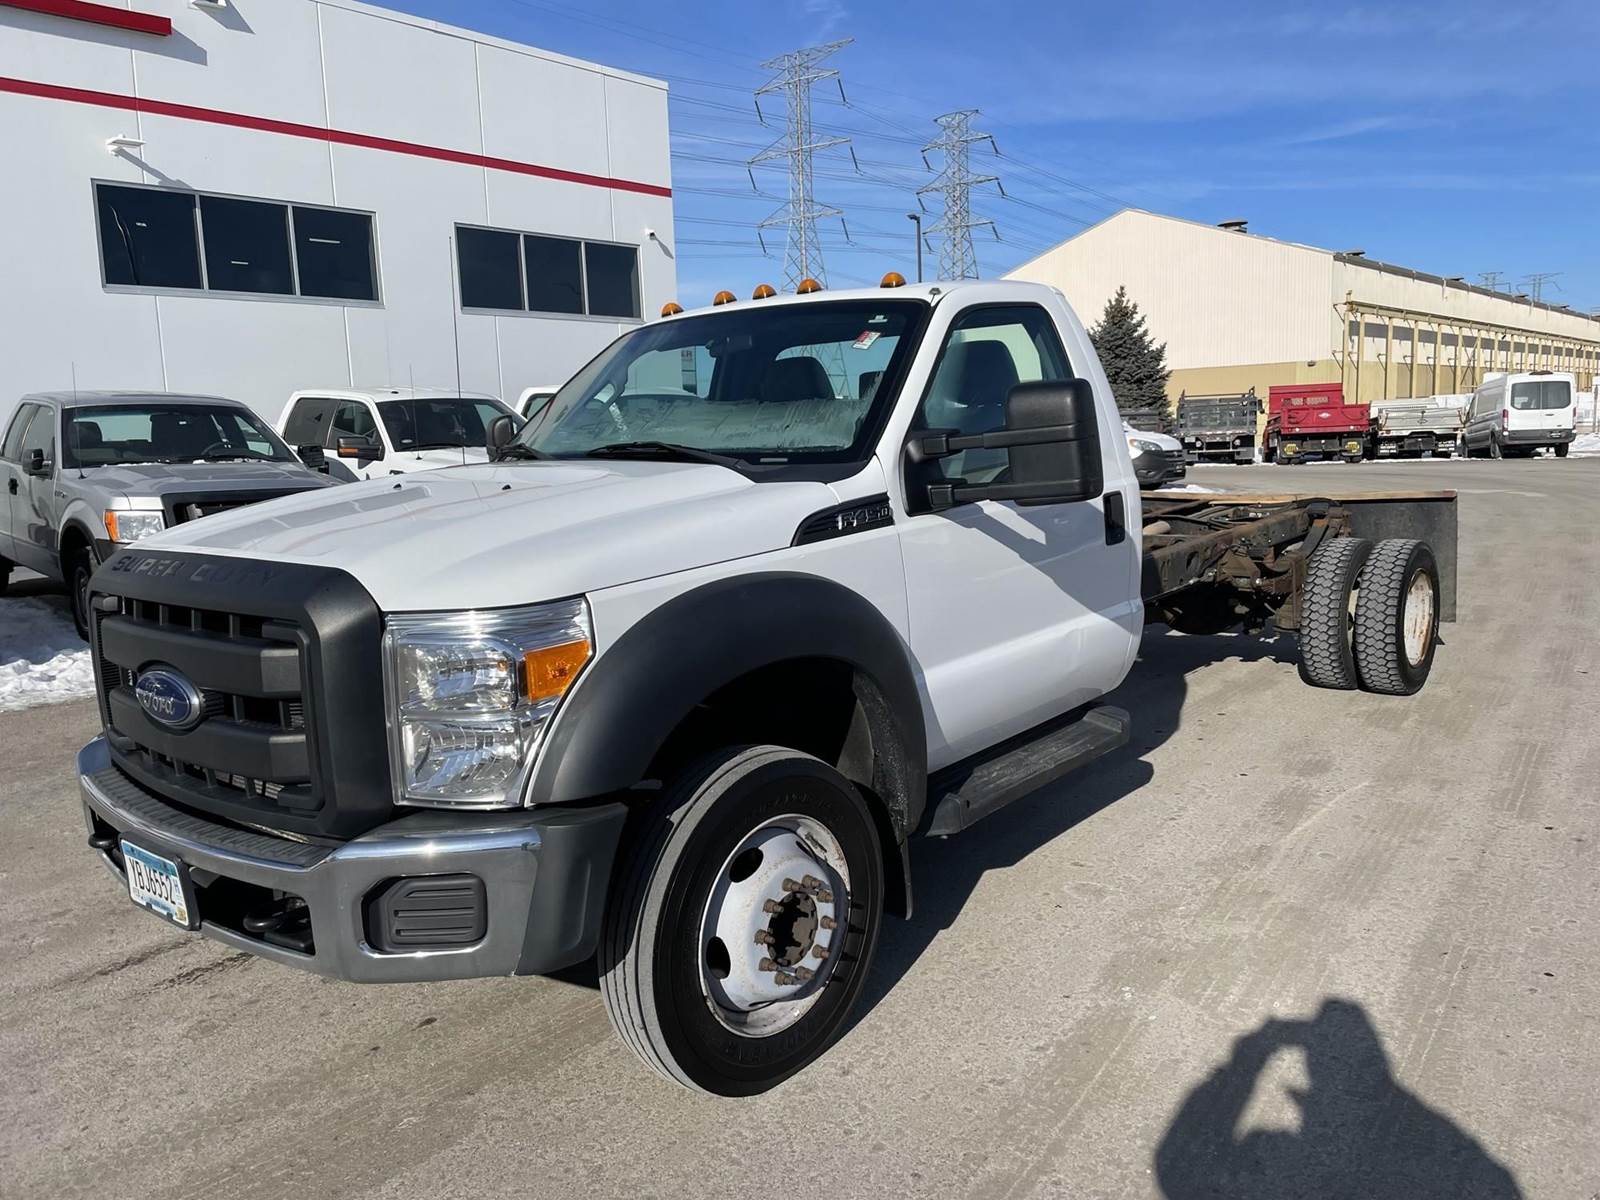 2013 Ford F-450 Cab & Chassis Truck - Automatic For Sale, 125,636 Miles |  Savage, MN | 1U1766 | MyLittleSalesman.com